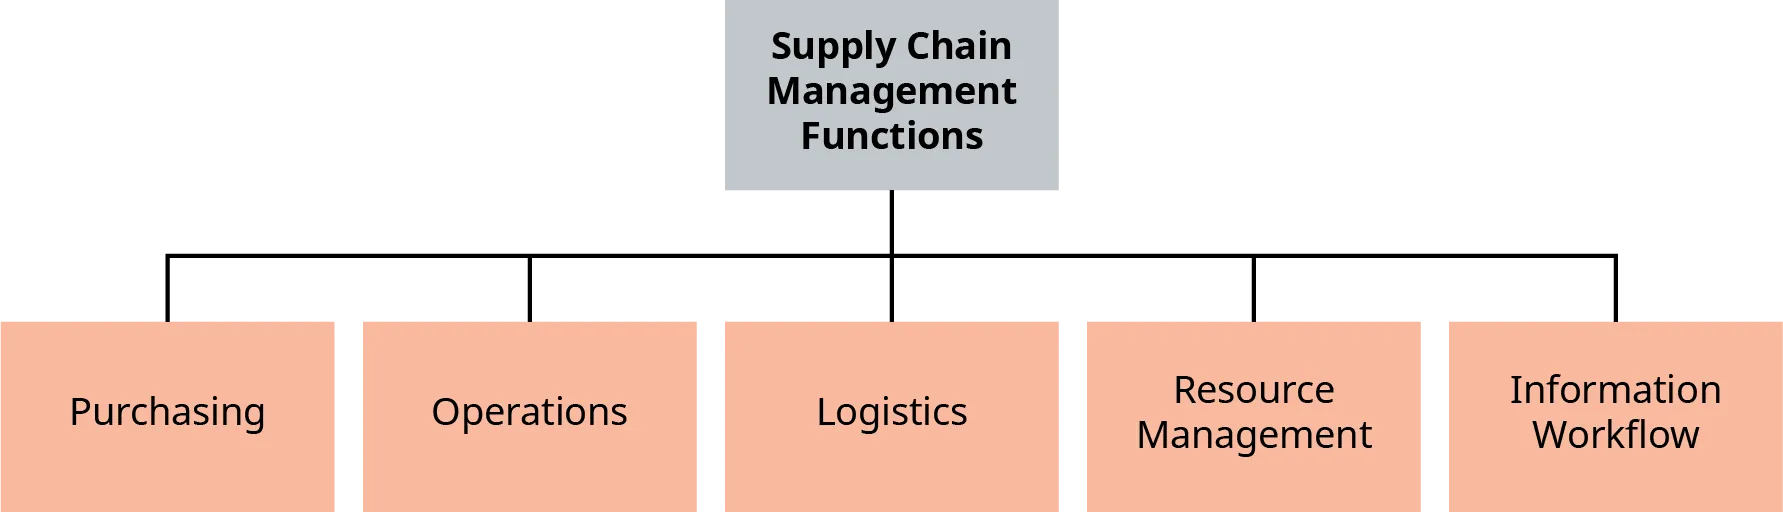 The five main functions of supply chain management are purchasing, operations, logistics, resource management, and information workflow.